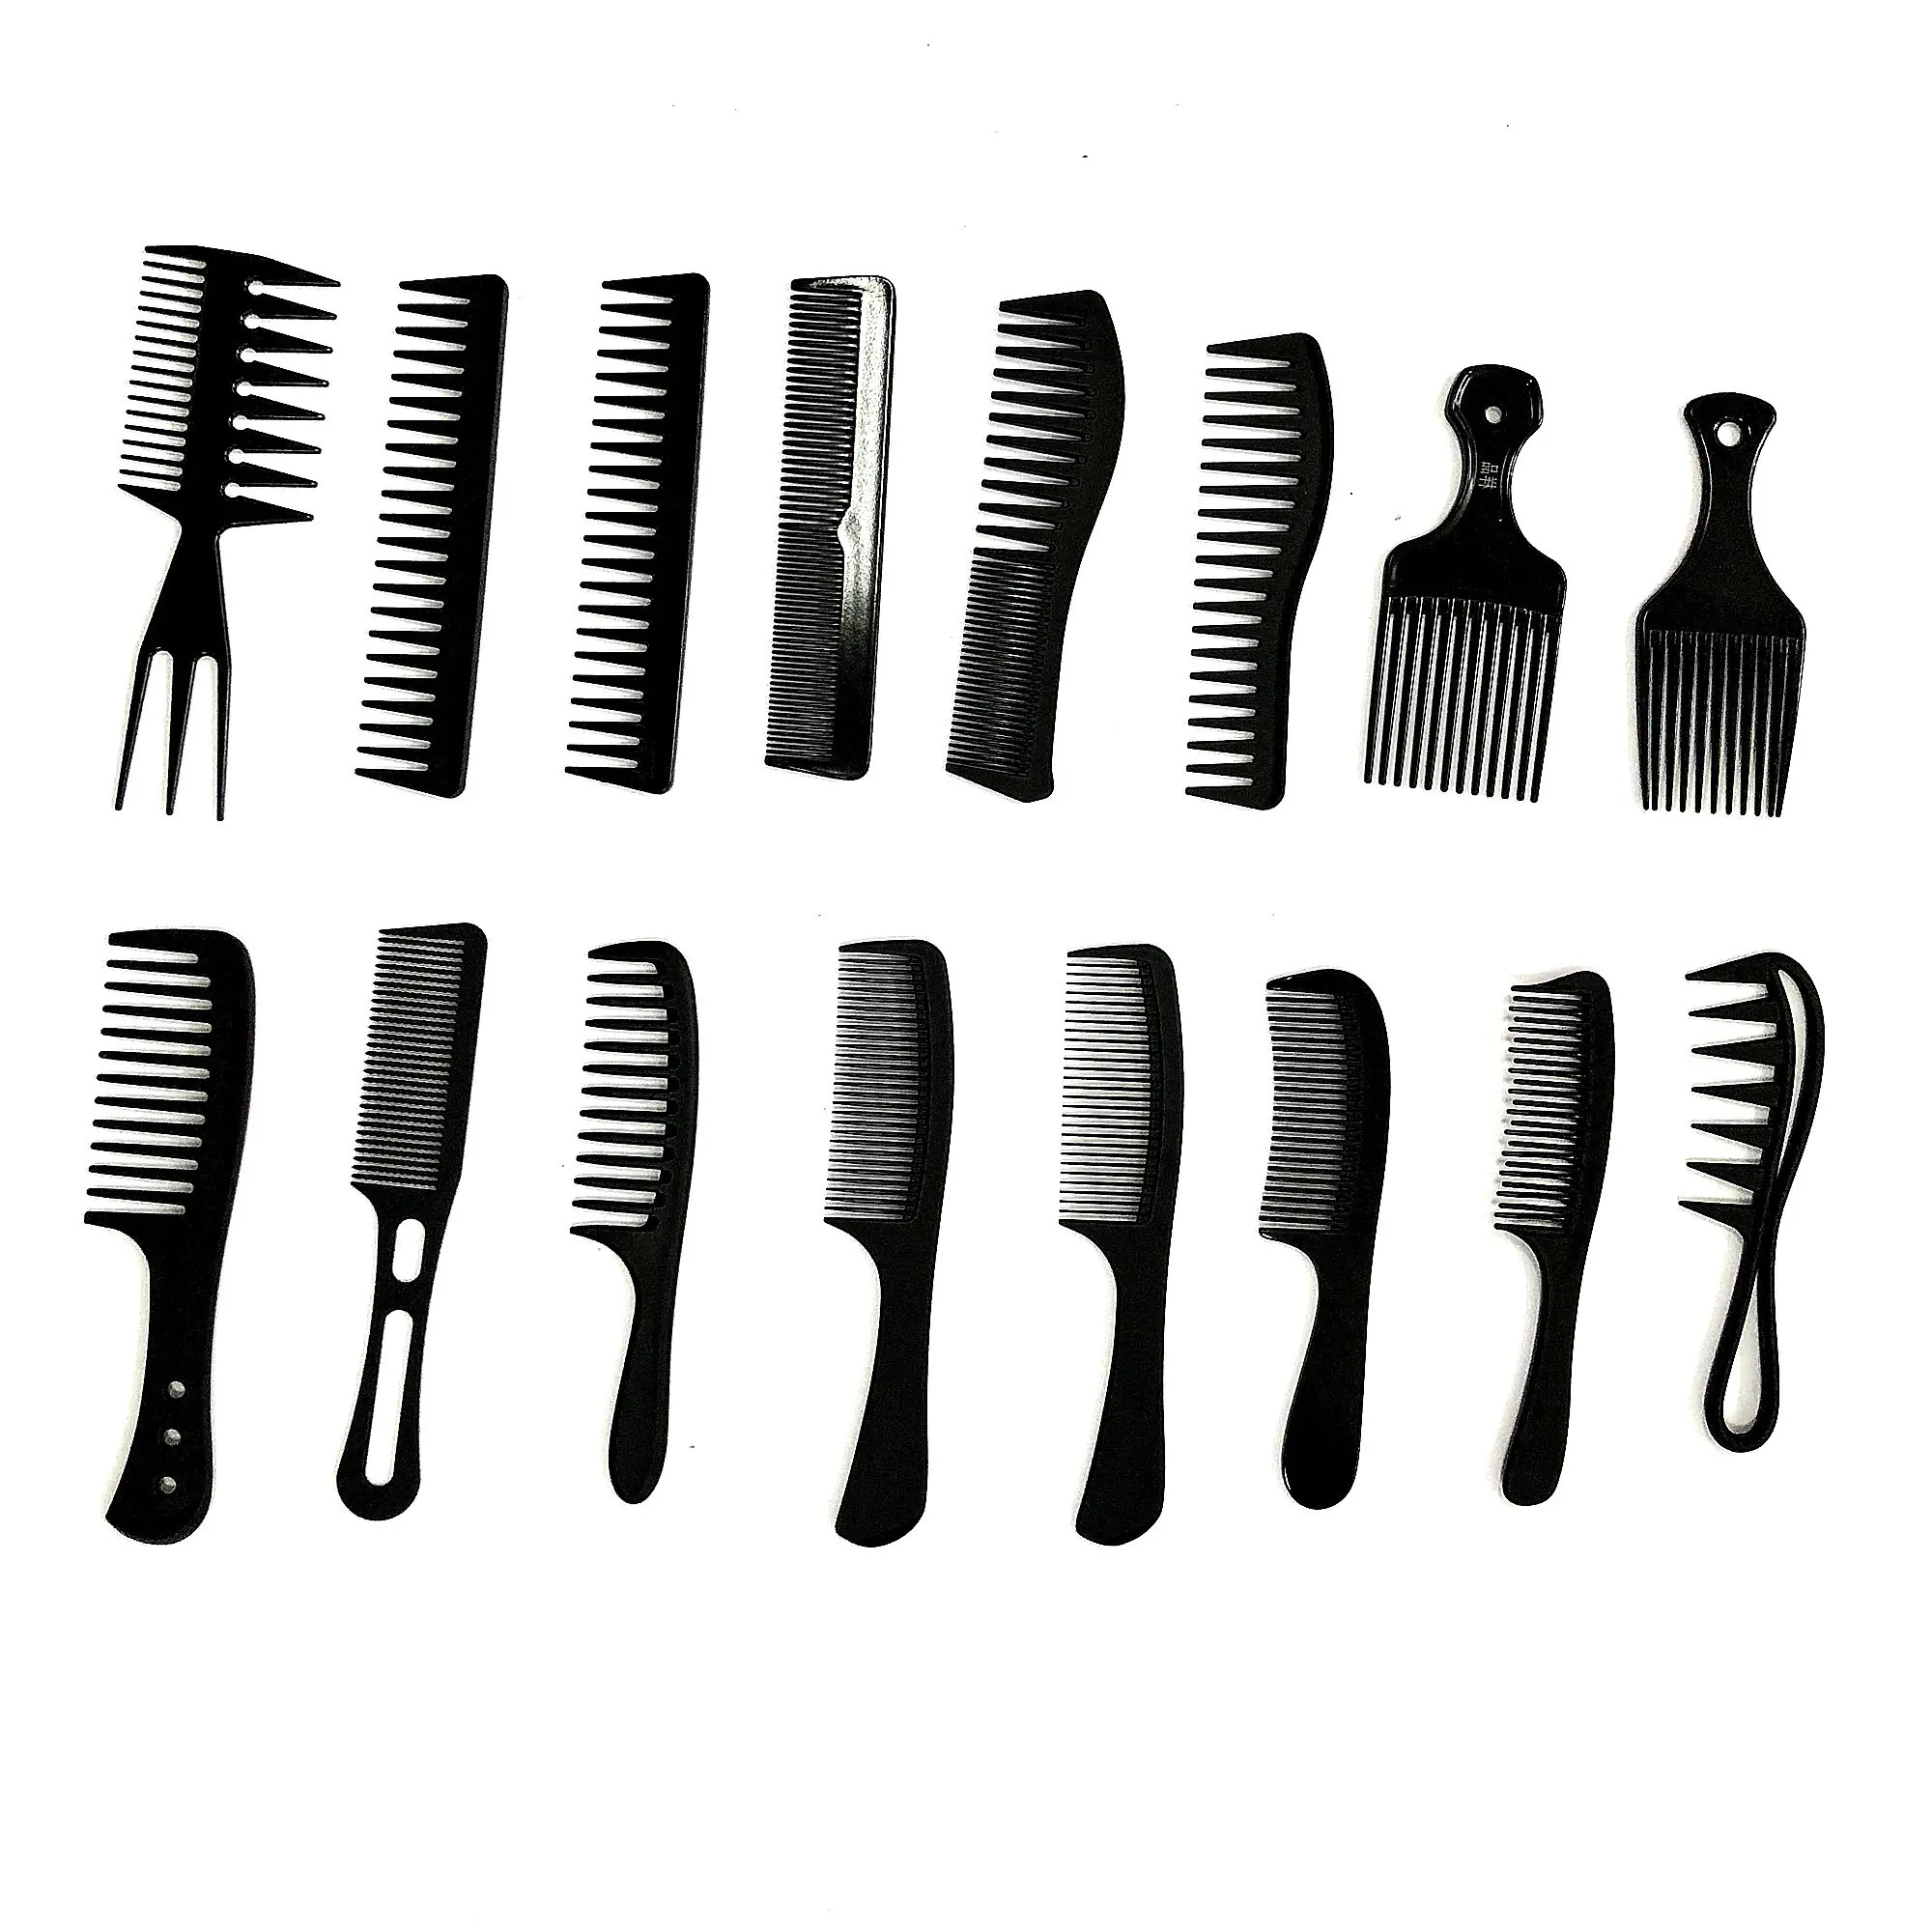 Black Straight Hair Comb Home & Salon Hair Styling Hairdressing Comb Set For Barber Professional Hair Cutting Comb